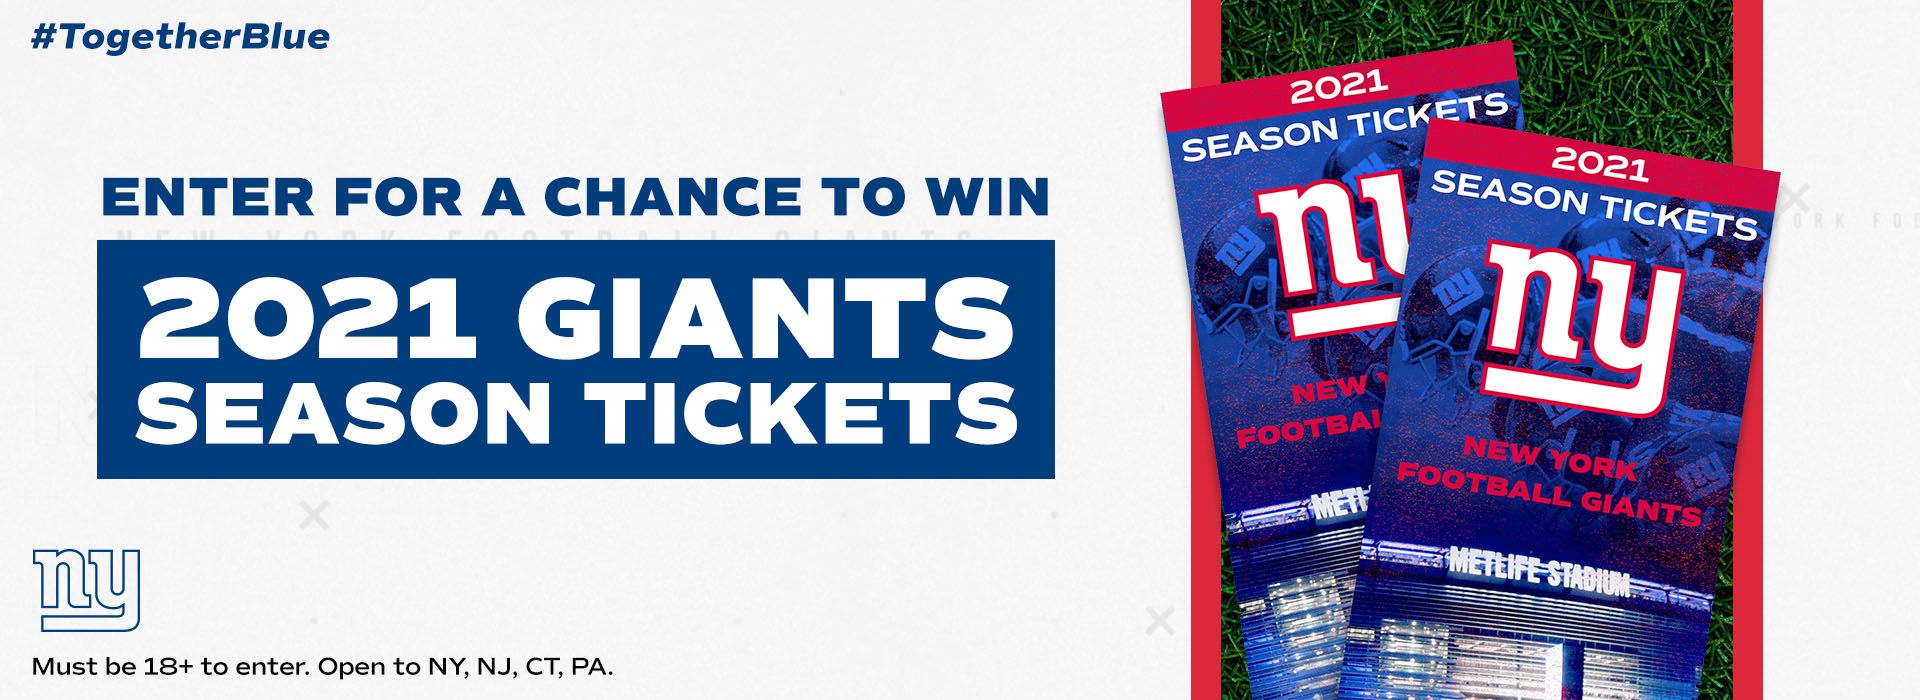 2021 Season Tickets Sweepstakes  Enter for a chance to win Two